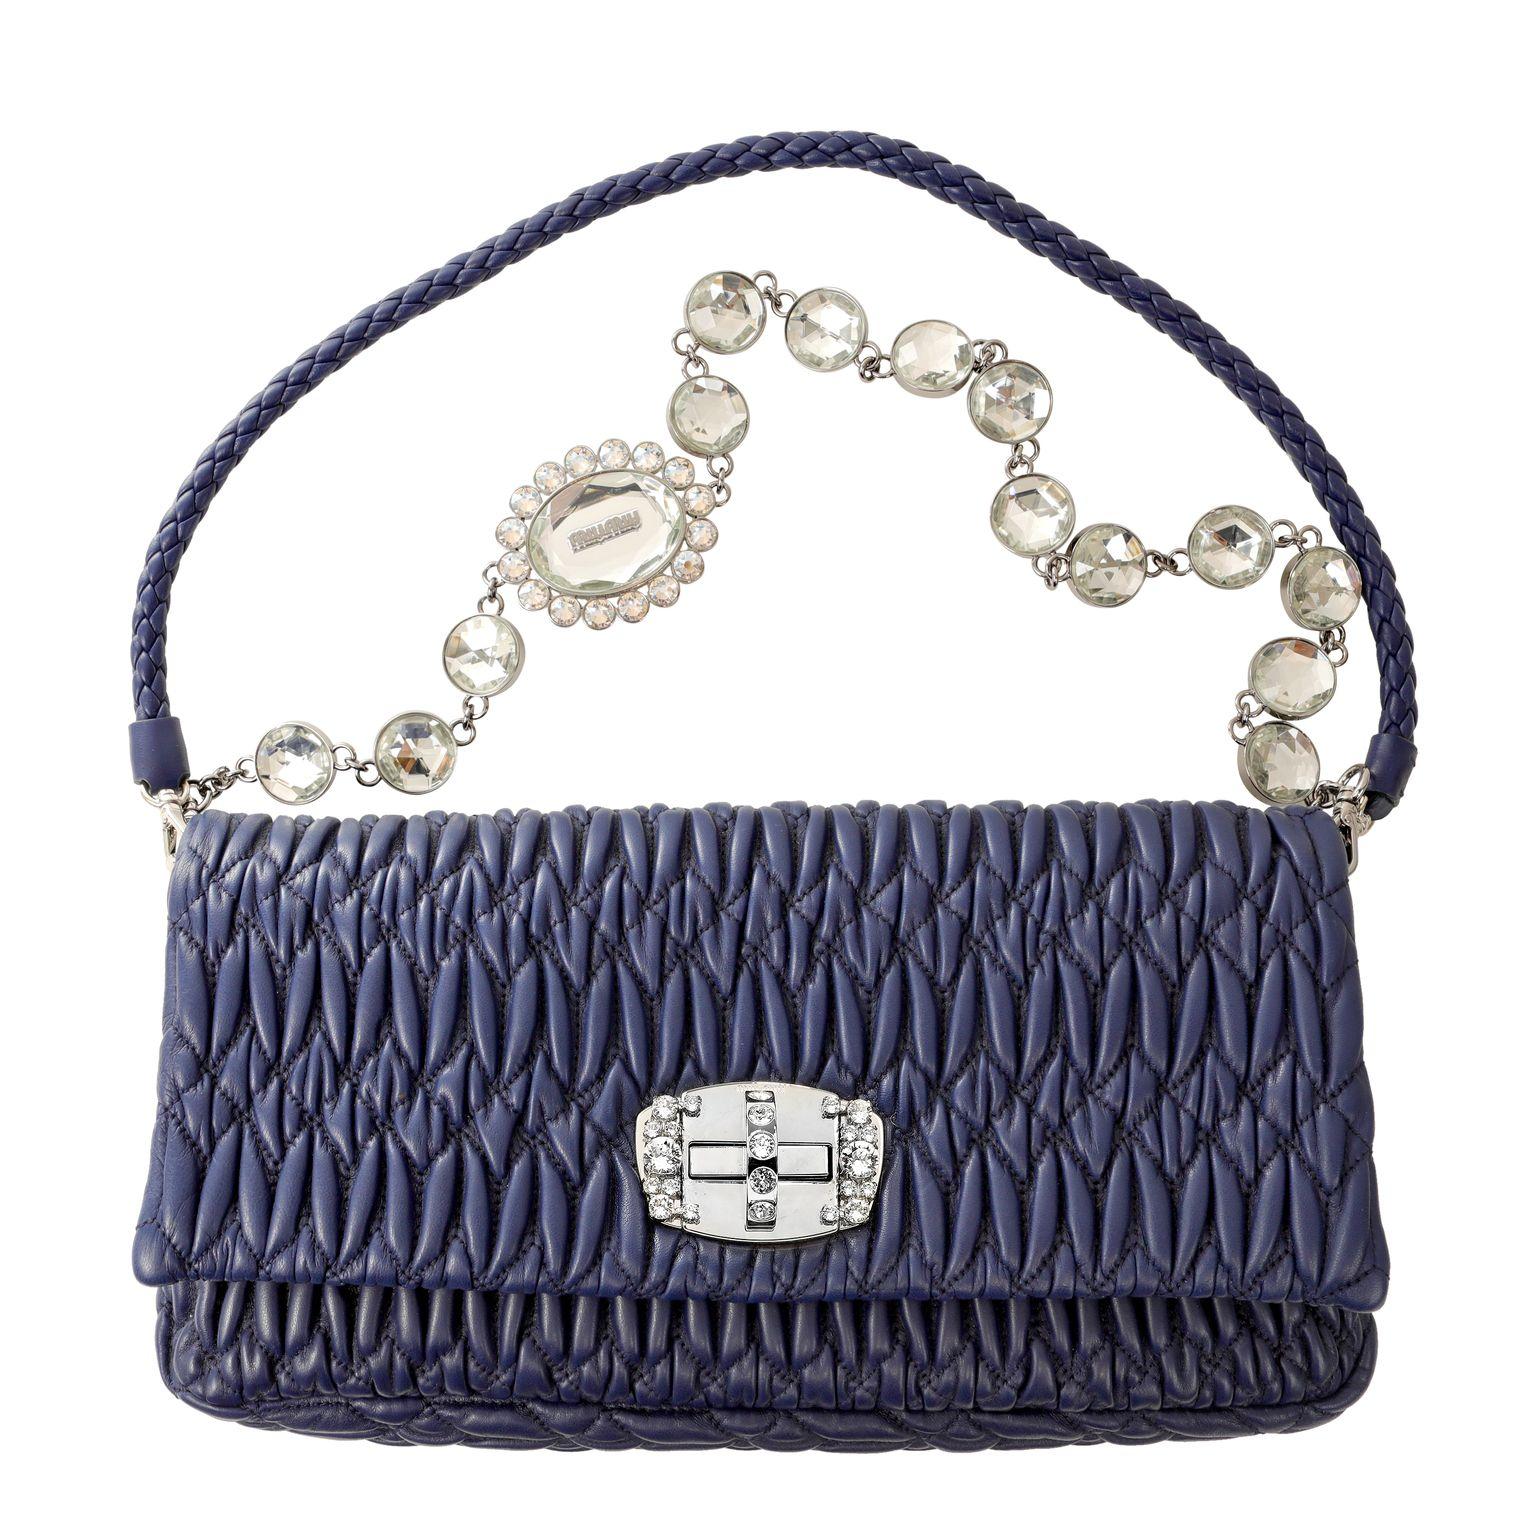 Miu Miu Royal Blue Iconic Crystal Cloquè Small Bag with Silver Hardware In Excellent Condition For Sale In Palm Beach, FL